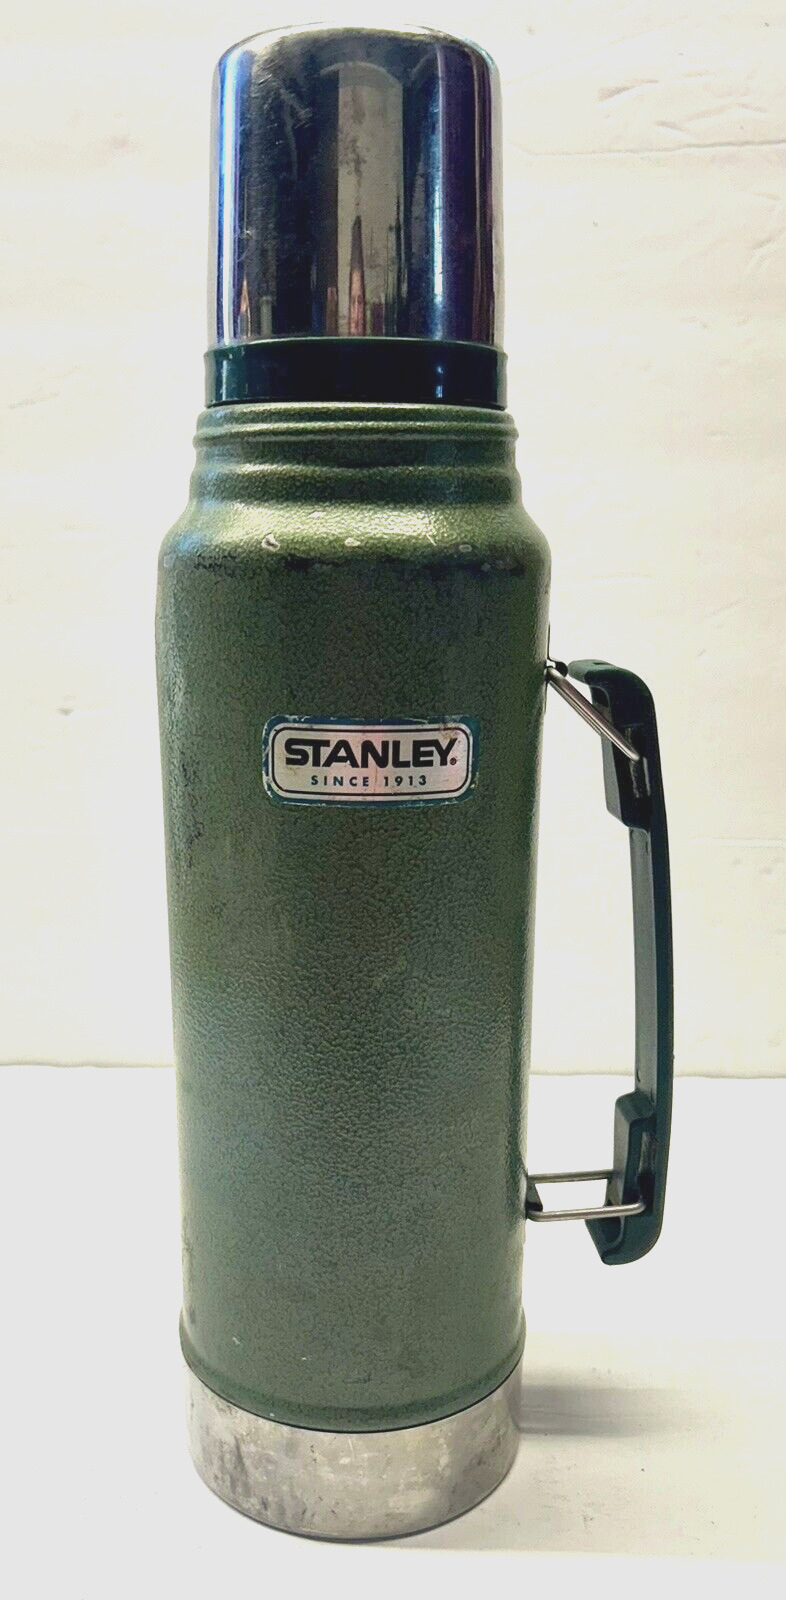 Vintage Stanley Aladdin Green Vacuum Bottle Thermos 1 Quart Made in USA